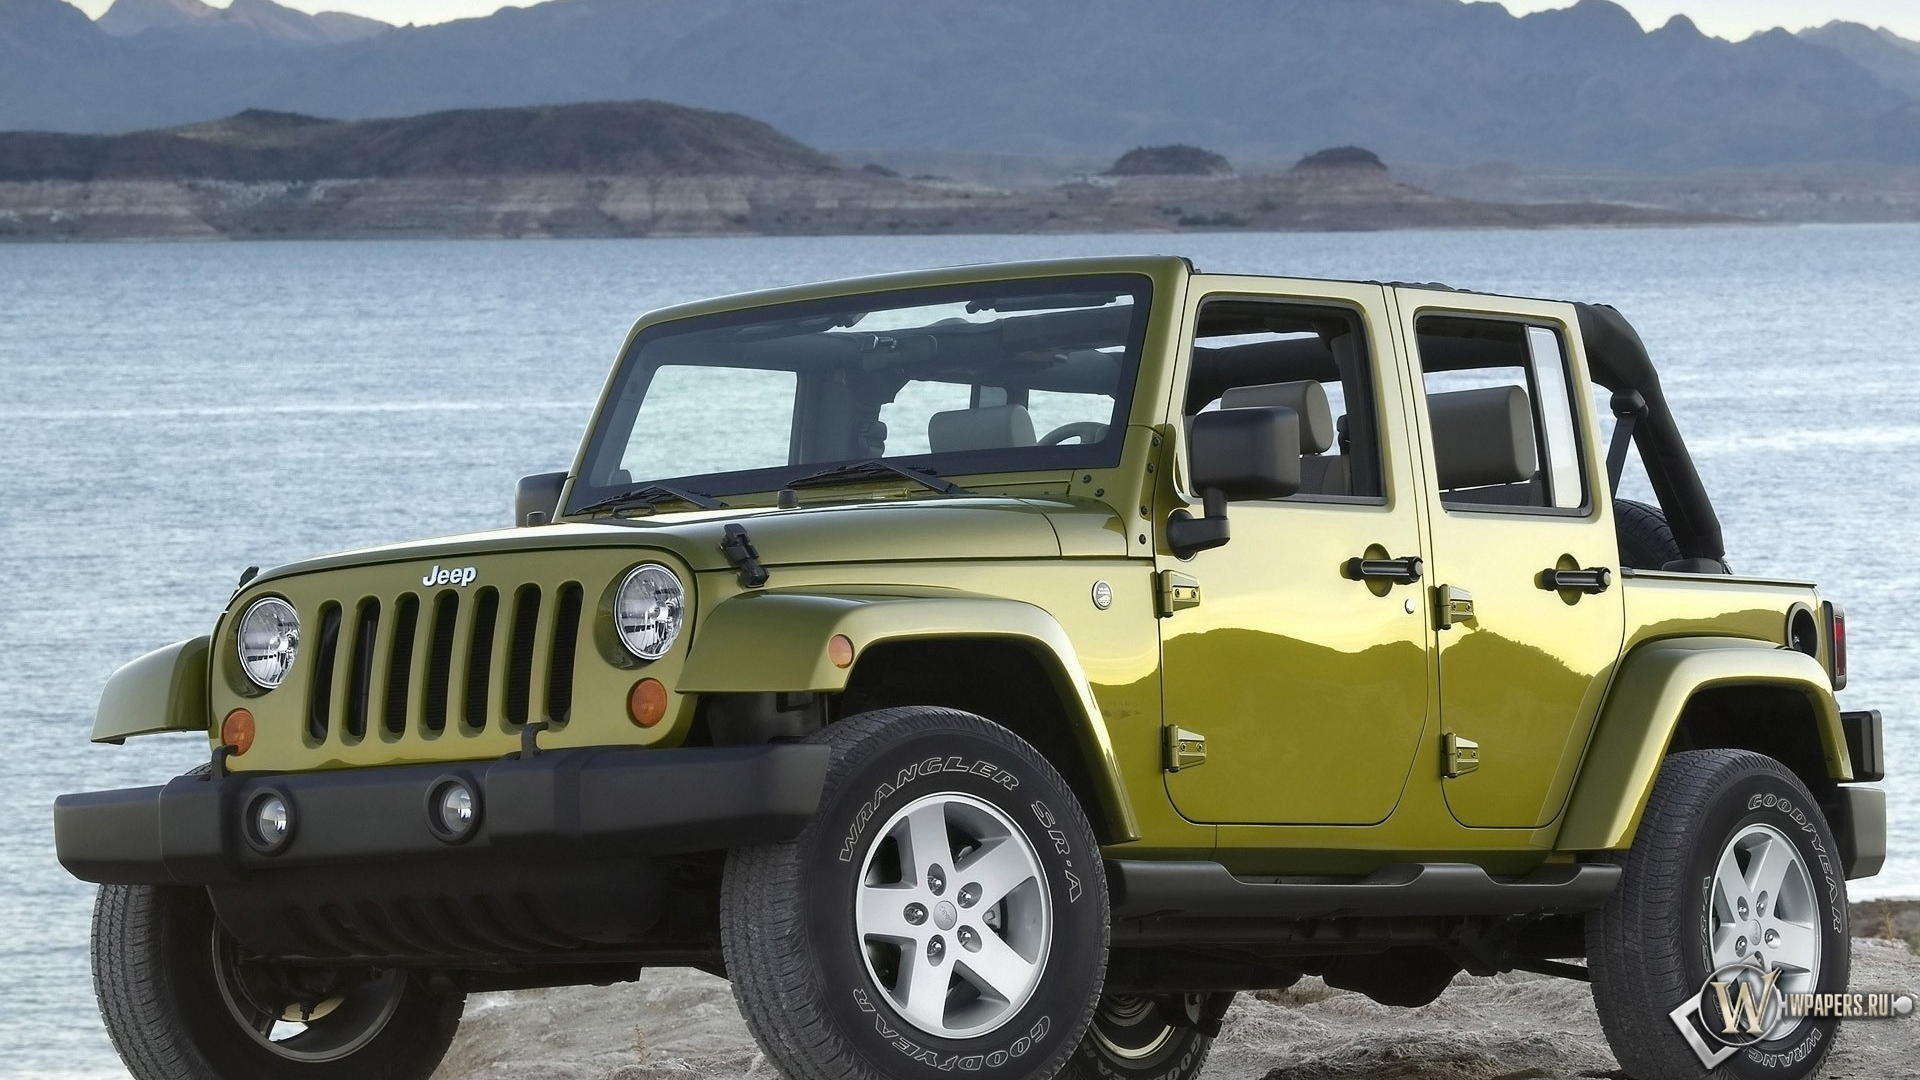 Jeep Wrangler Unlimited 1920x1080